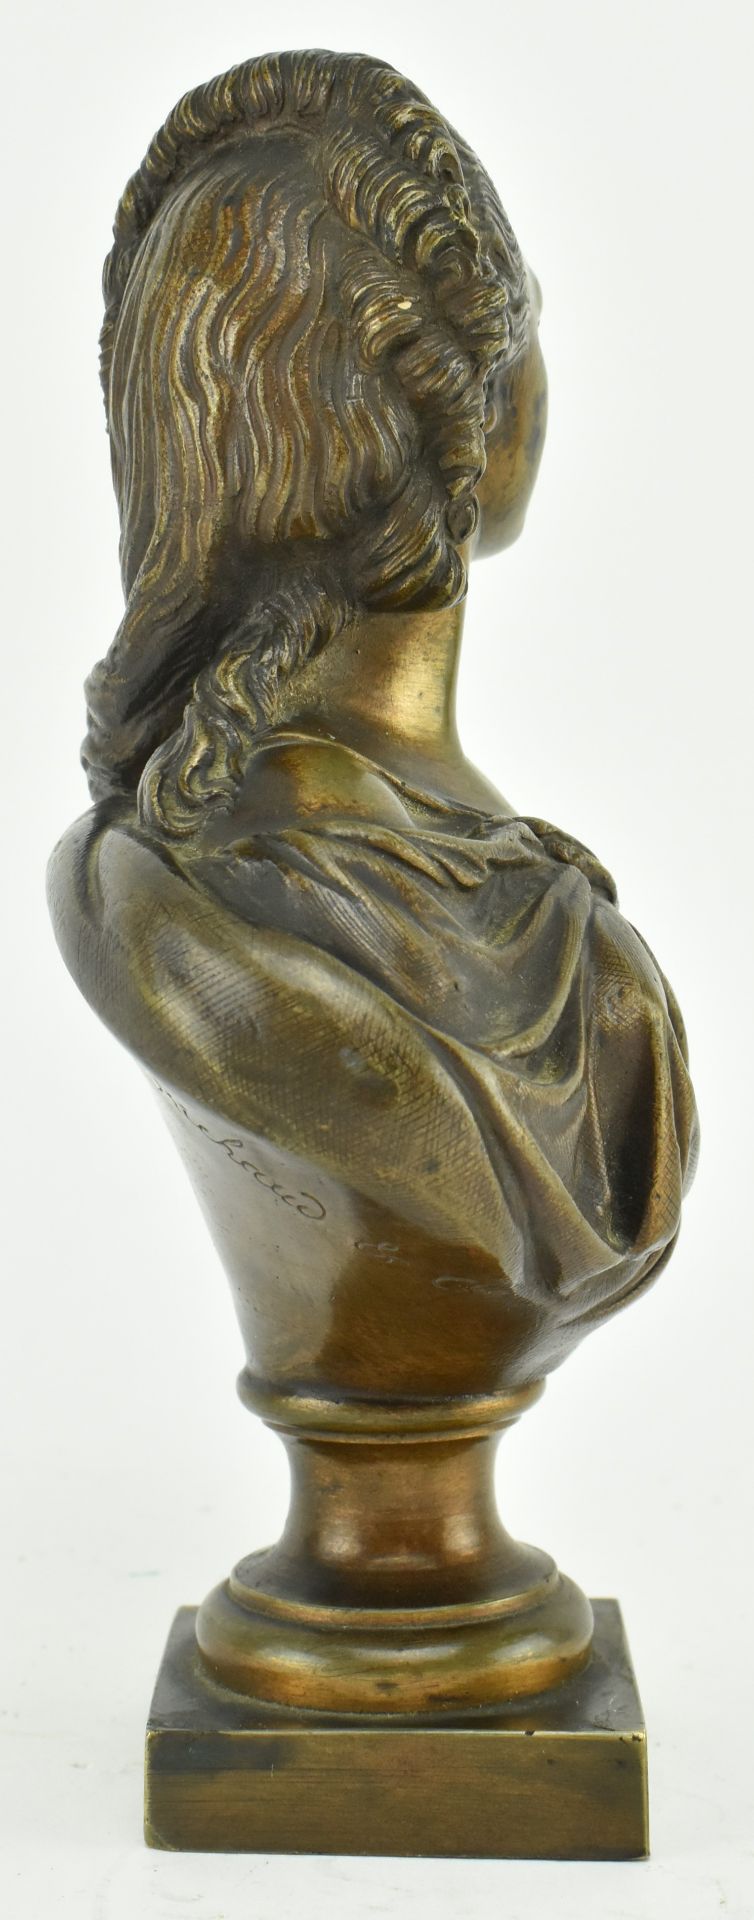 RICHAUD ET CIE - 19TH CENTURY FRENCH BRONZE BUST OF WOMAN - Image 4 of 5